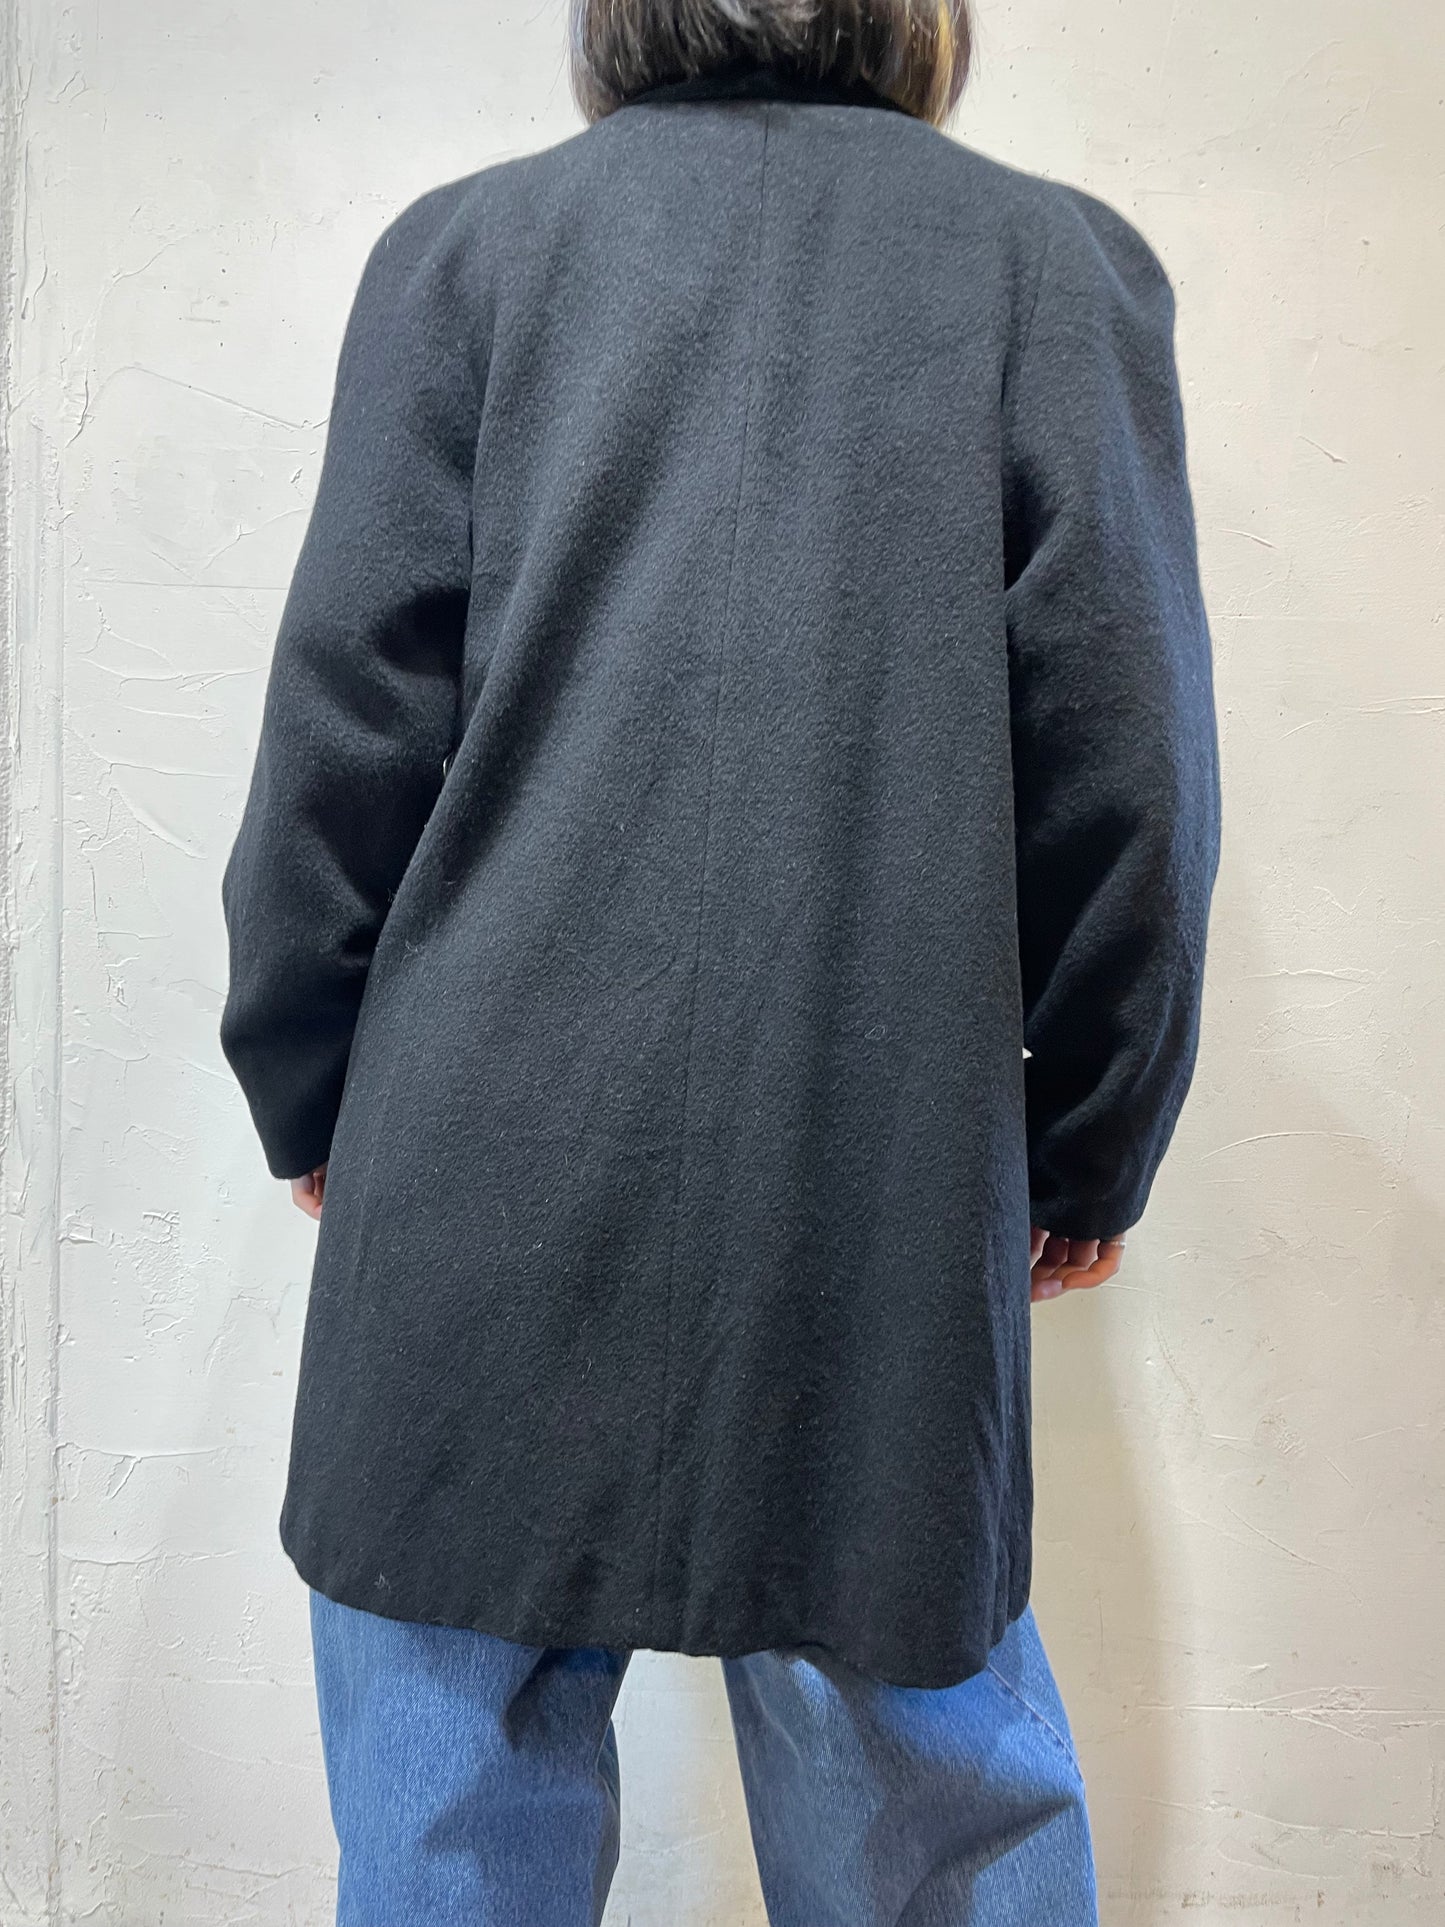 '80s Vintage Coat MADE IN USA [L25741]